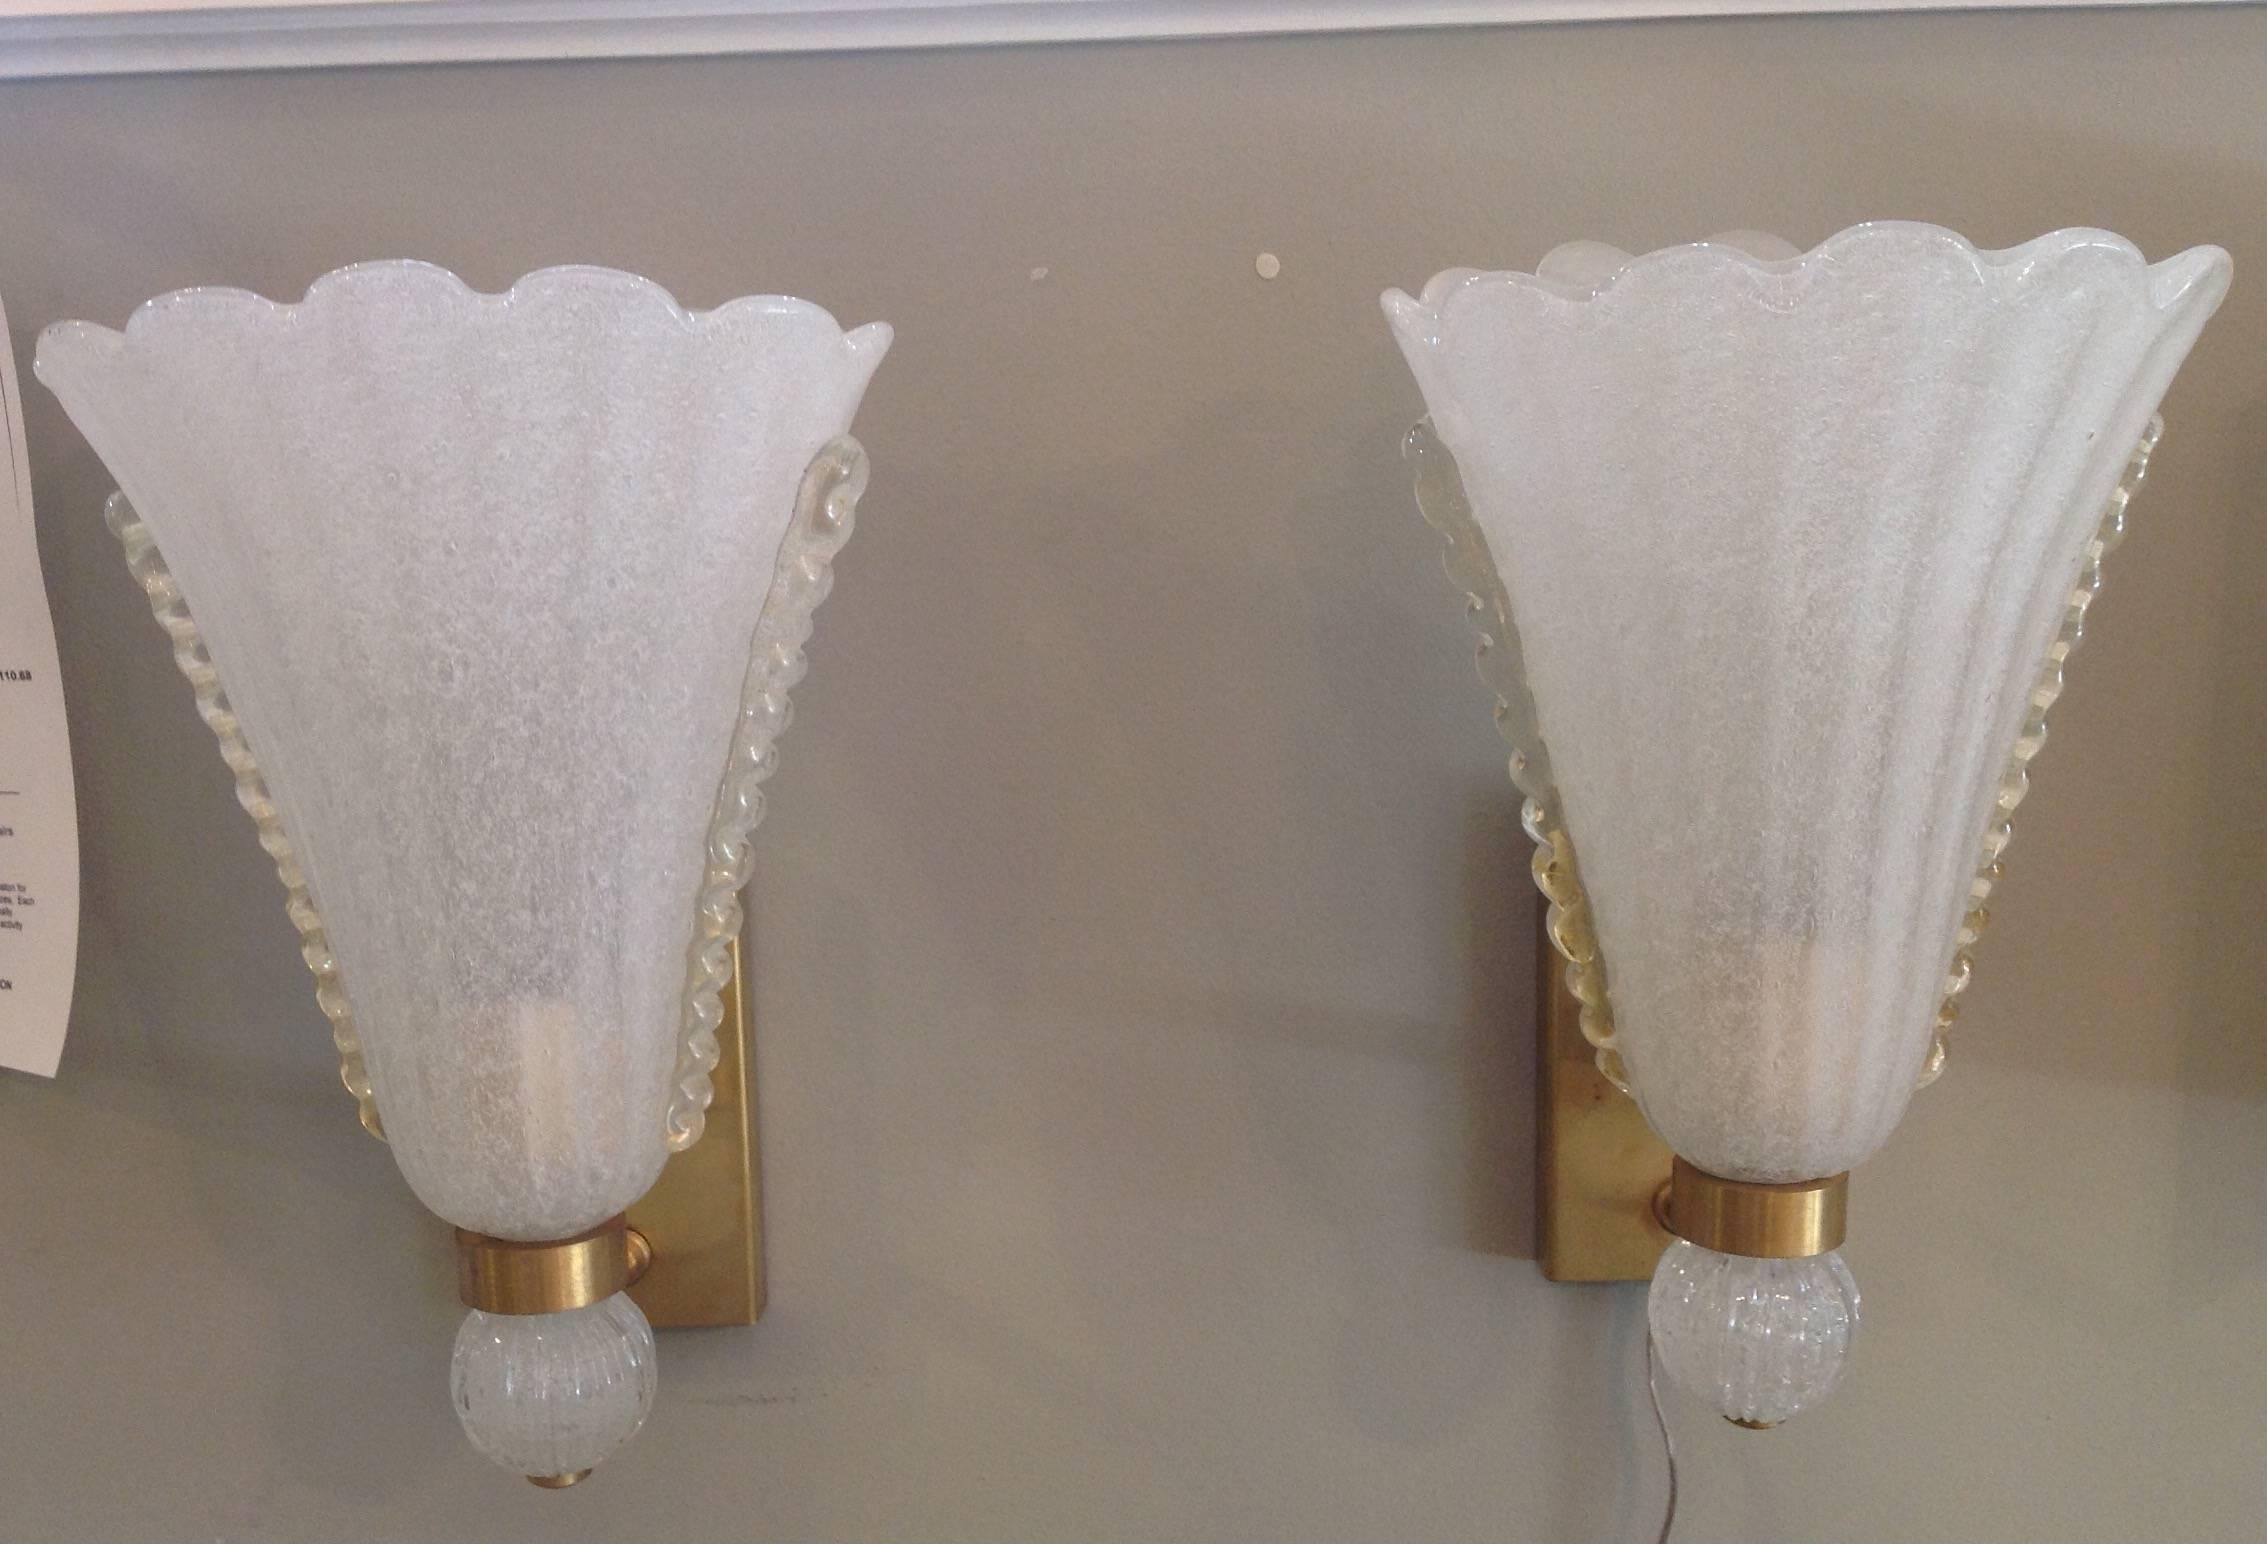 Pair of Barovier sconces in a white opaque bubbled glass with a clear design on the sides. They are single light with brass mounts.